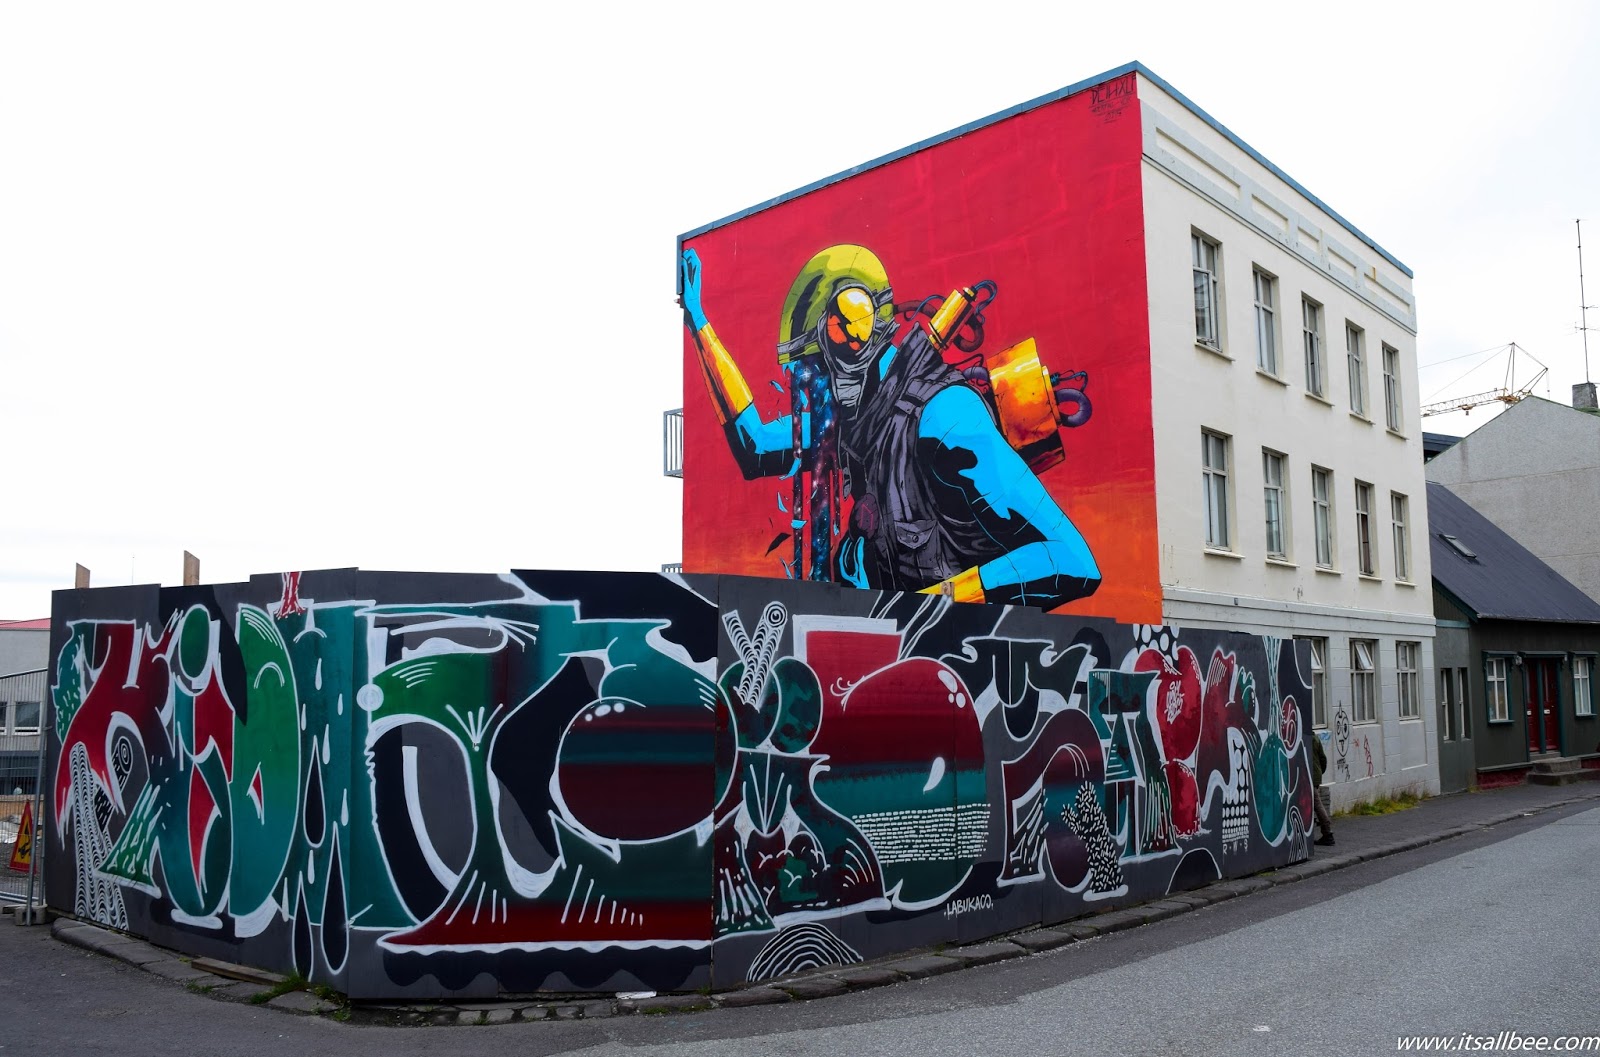 Iceland Street Art| A Colourful Side of Iceland You Need To Check Out